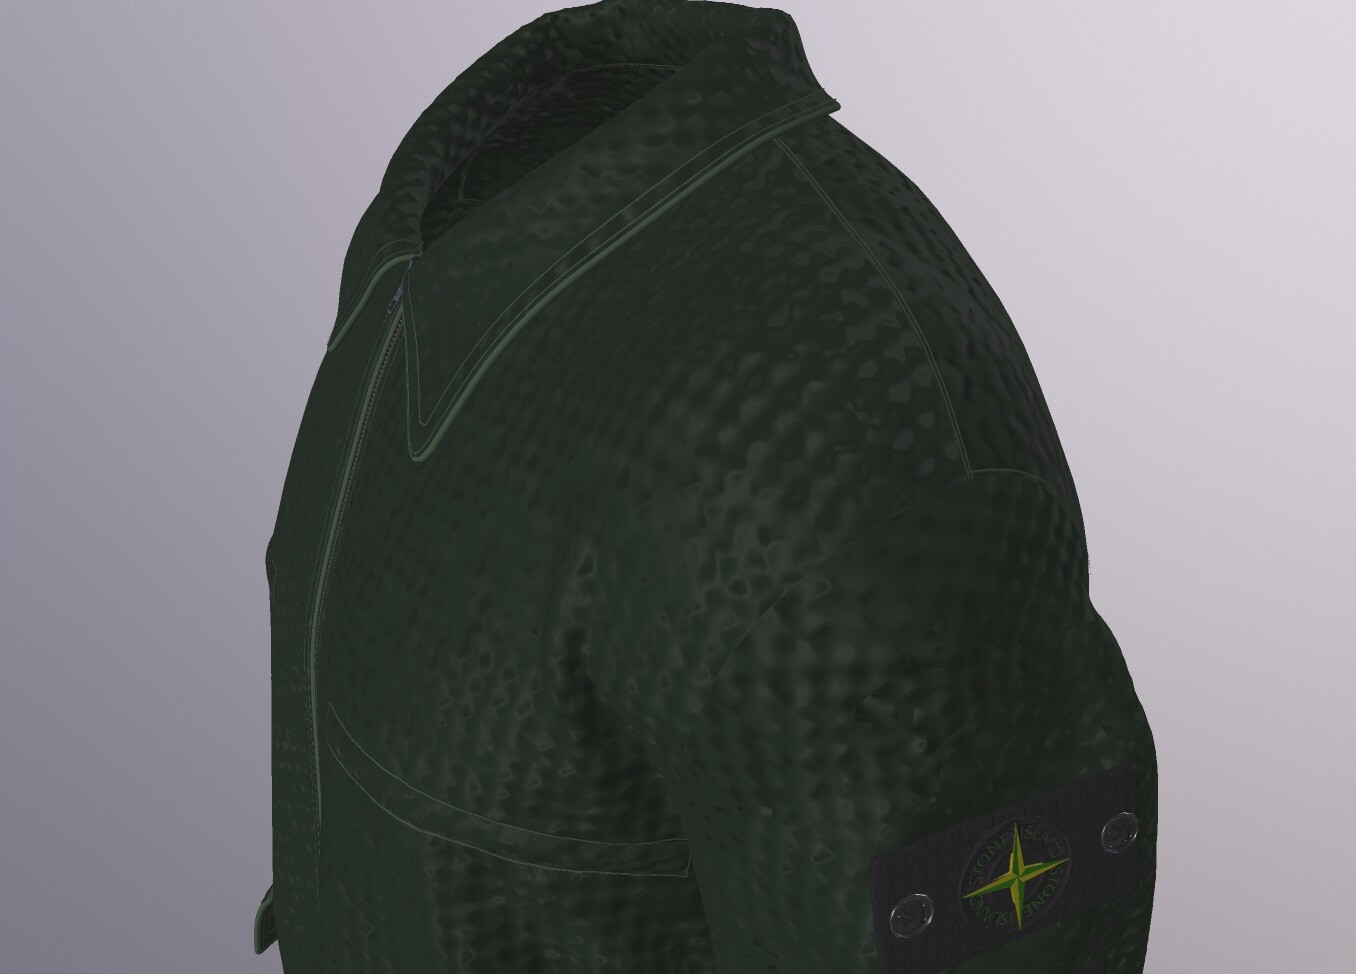 ArtStation - STONE ISLAND LEATHER JACKET low-poly PBR | Game Assets